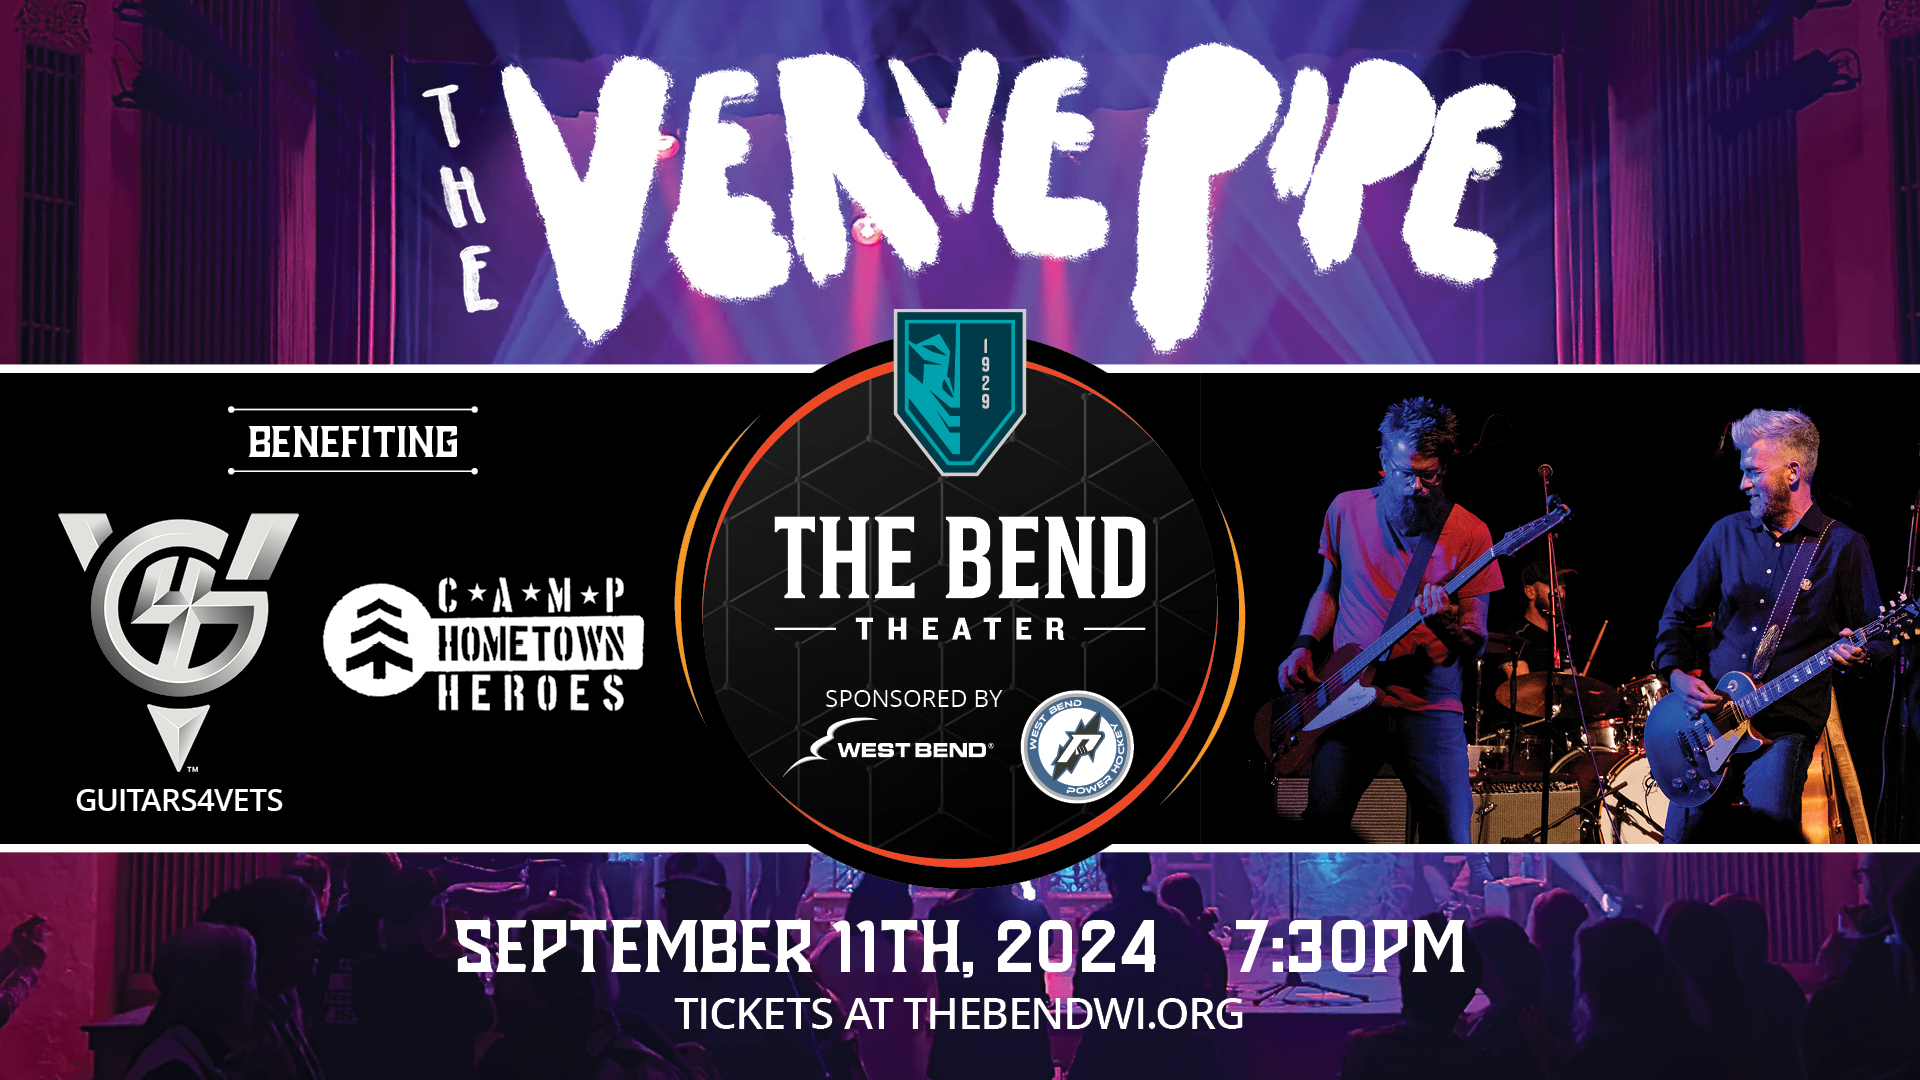 The Verve Pipe benefiting Guitars4Vets & Camp Hometown Heroes